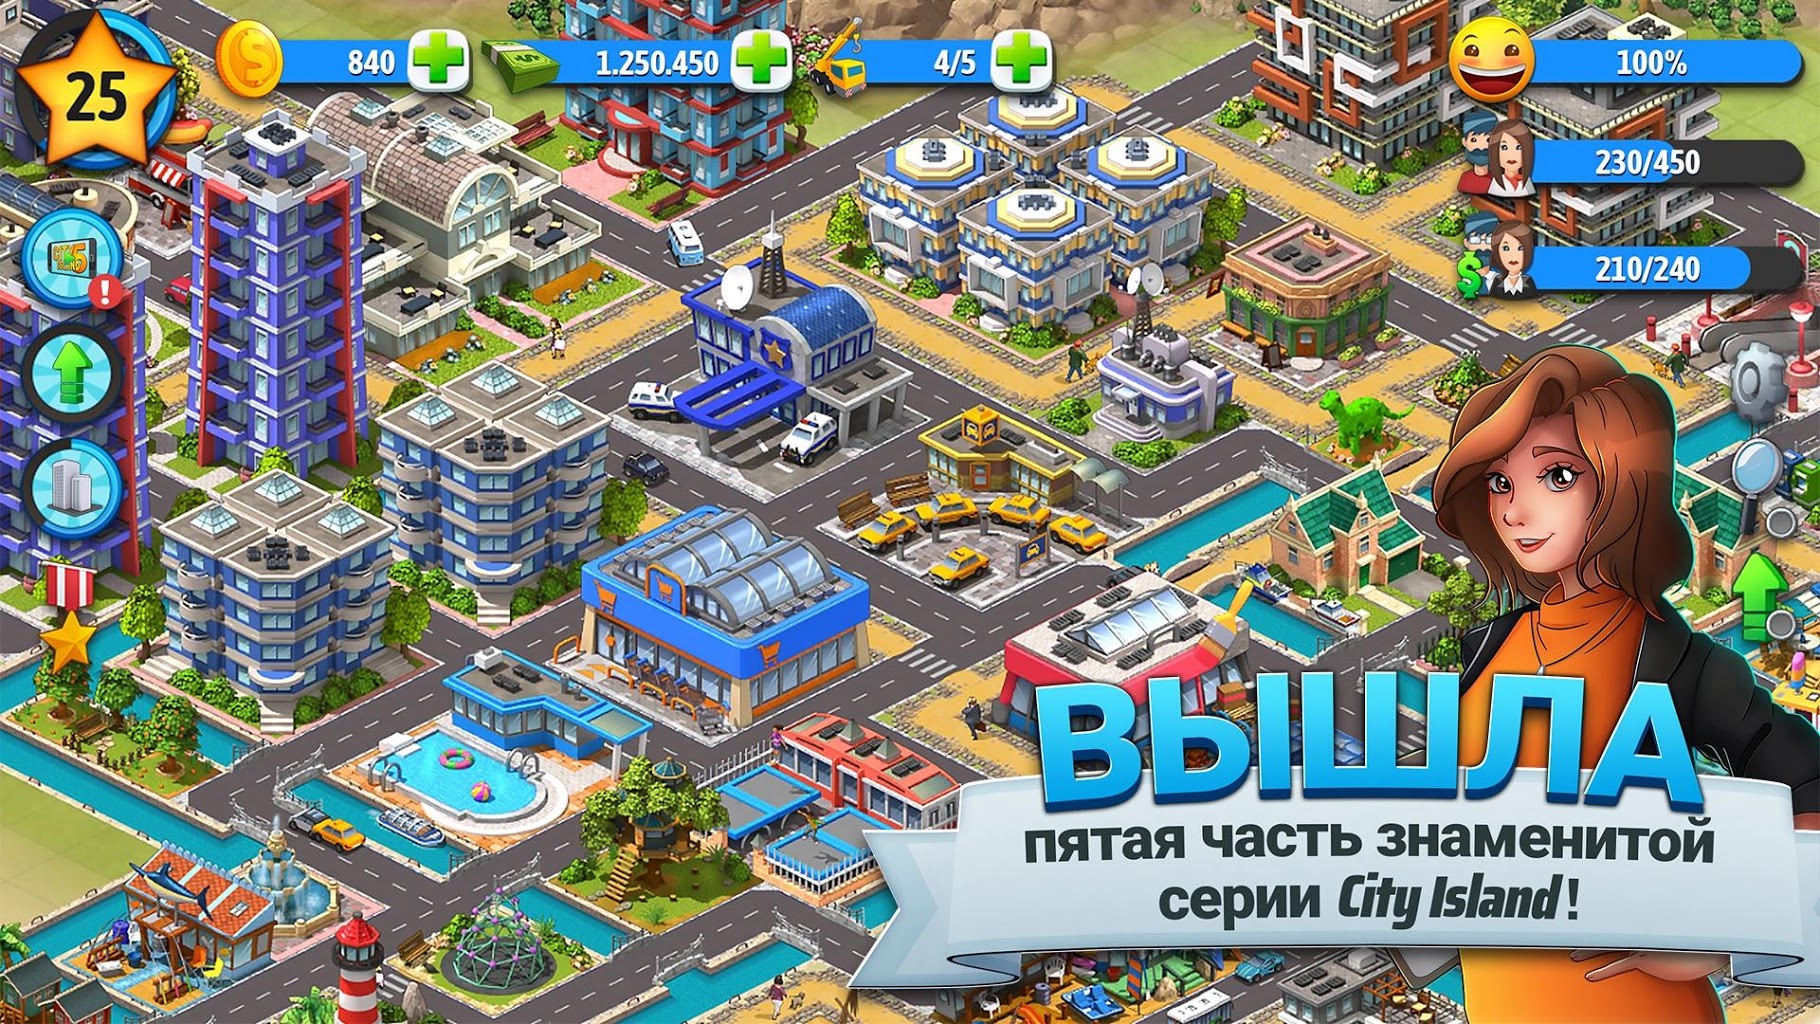 how to speed up time in city island 5